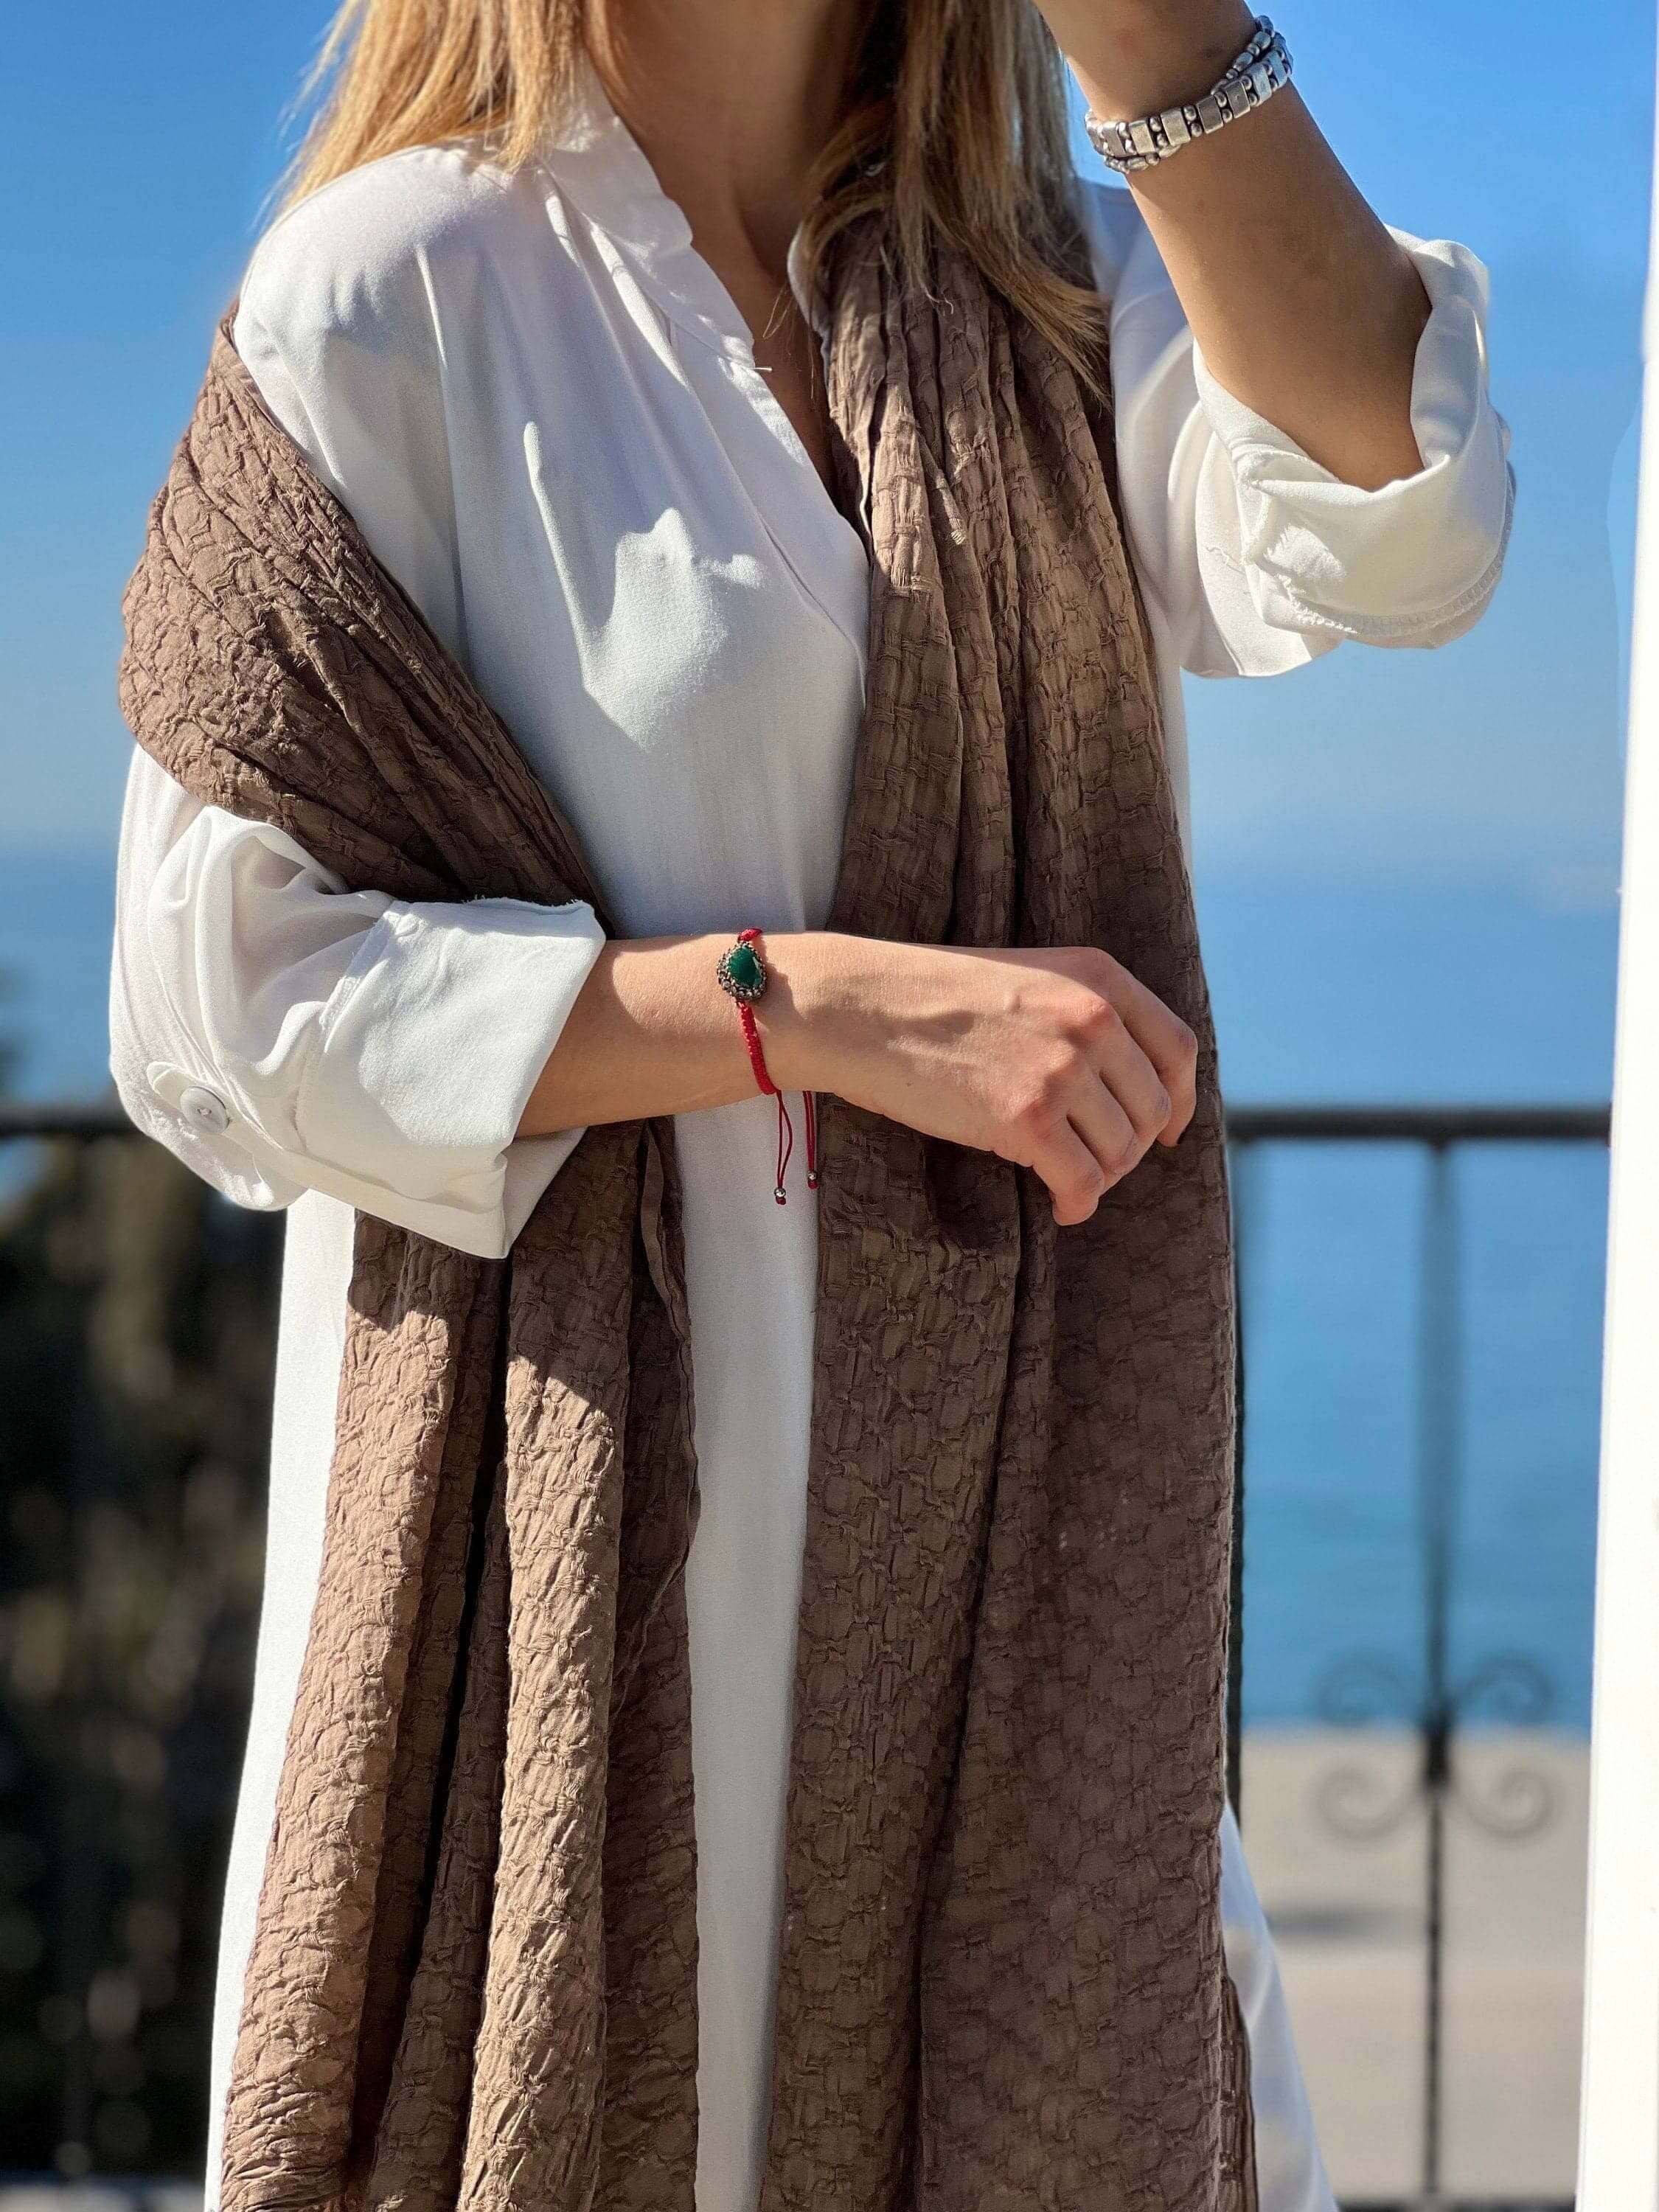 Get your mom the perfect gift this winter with an organic cotton large rectangle scarf in mink color. This scarf is perfect for all seasons and will keep her warm and cozy.